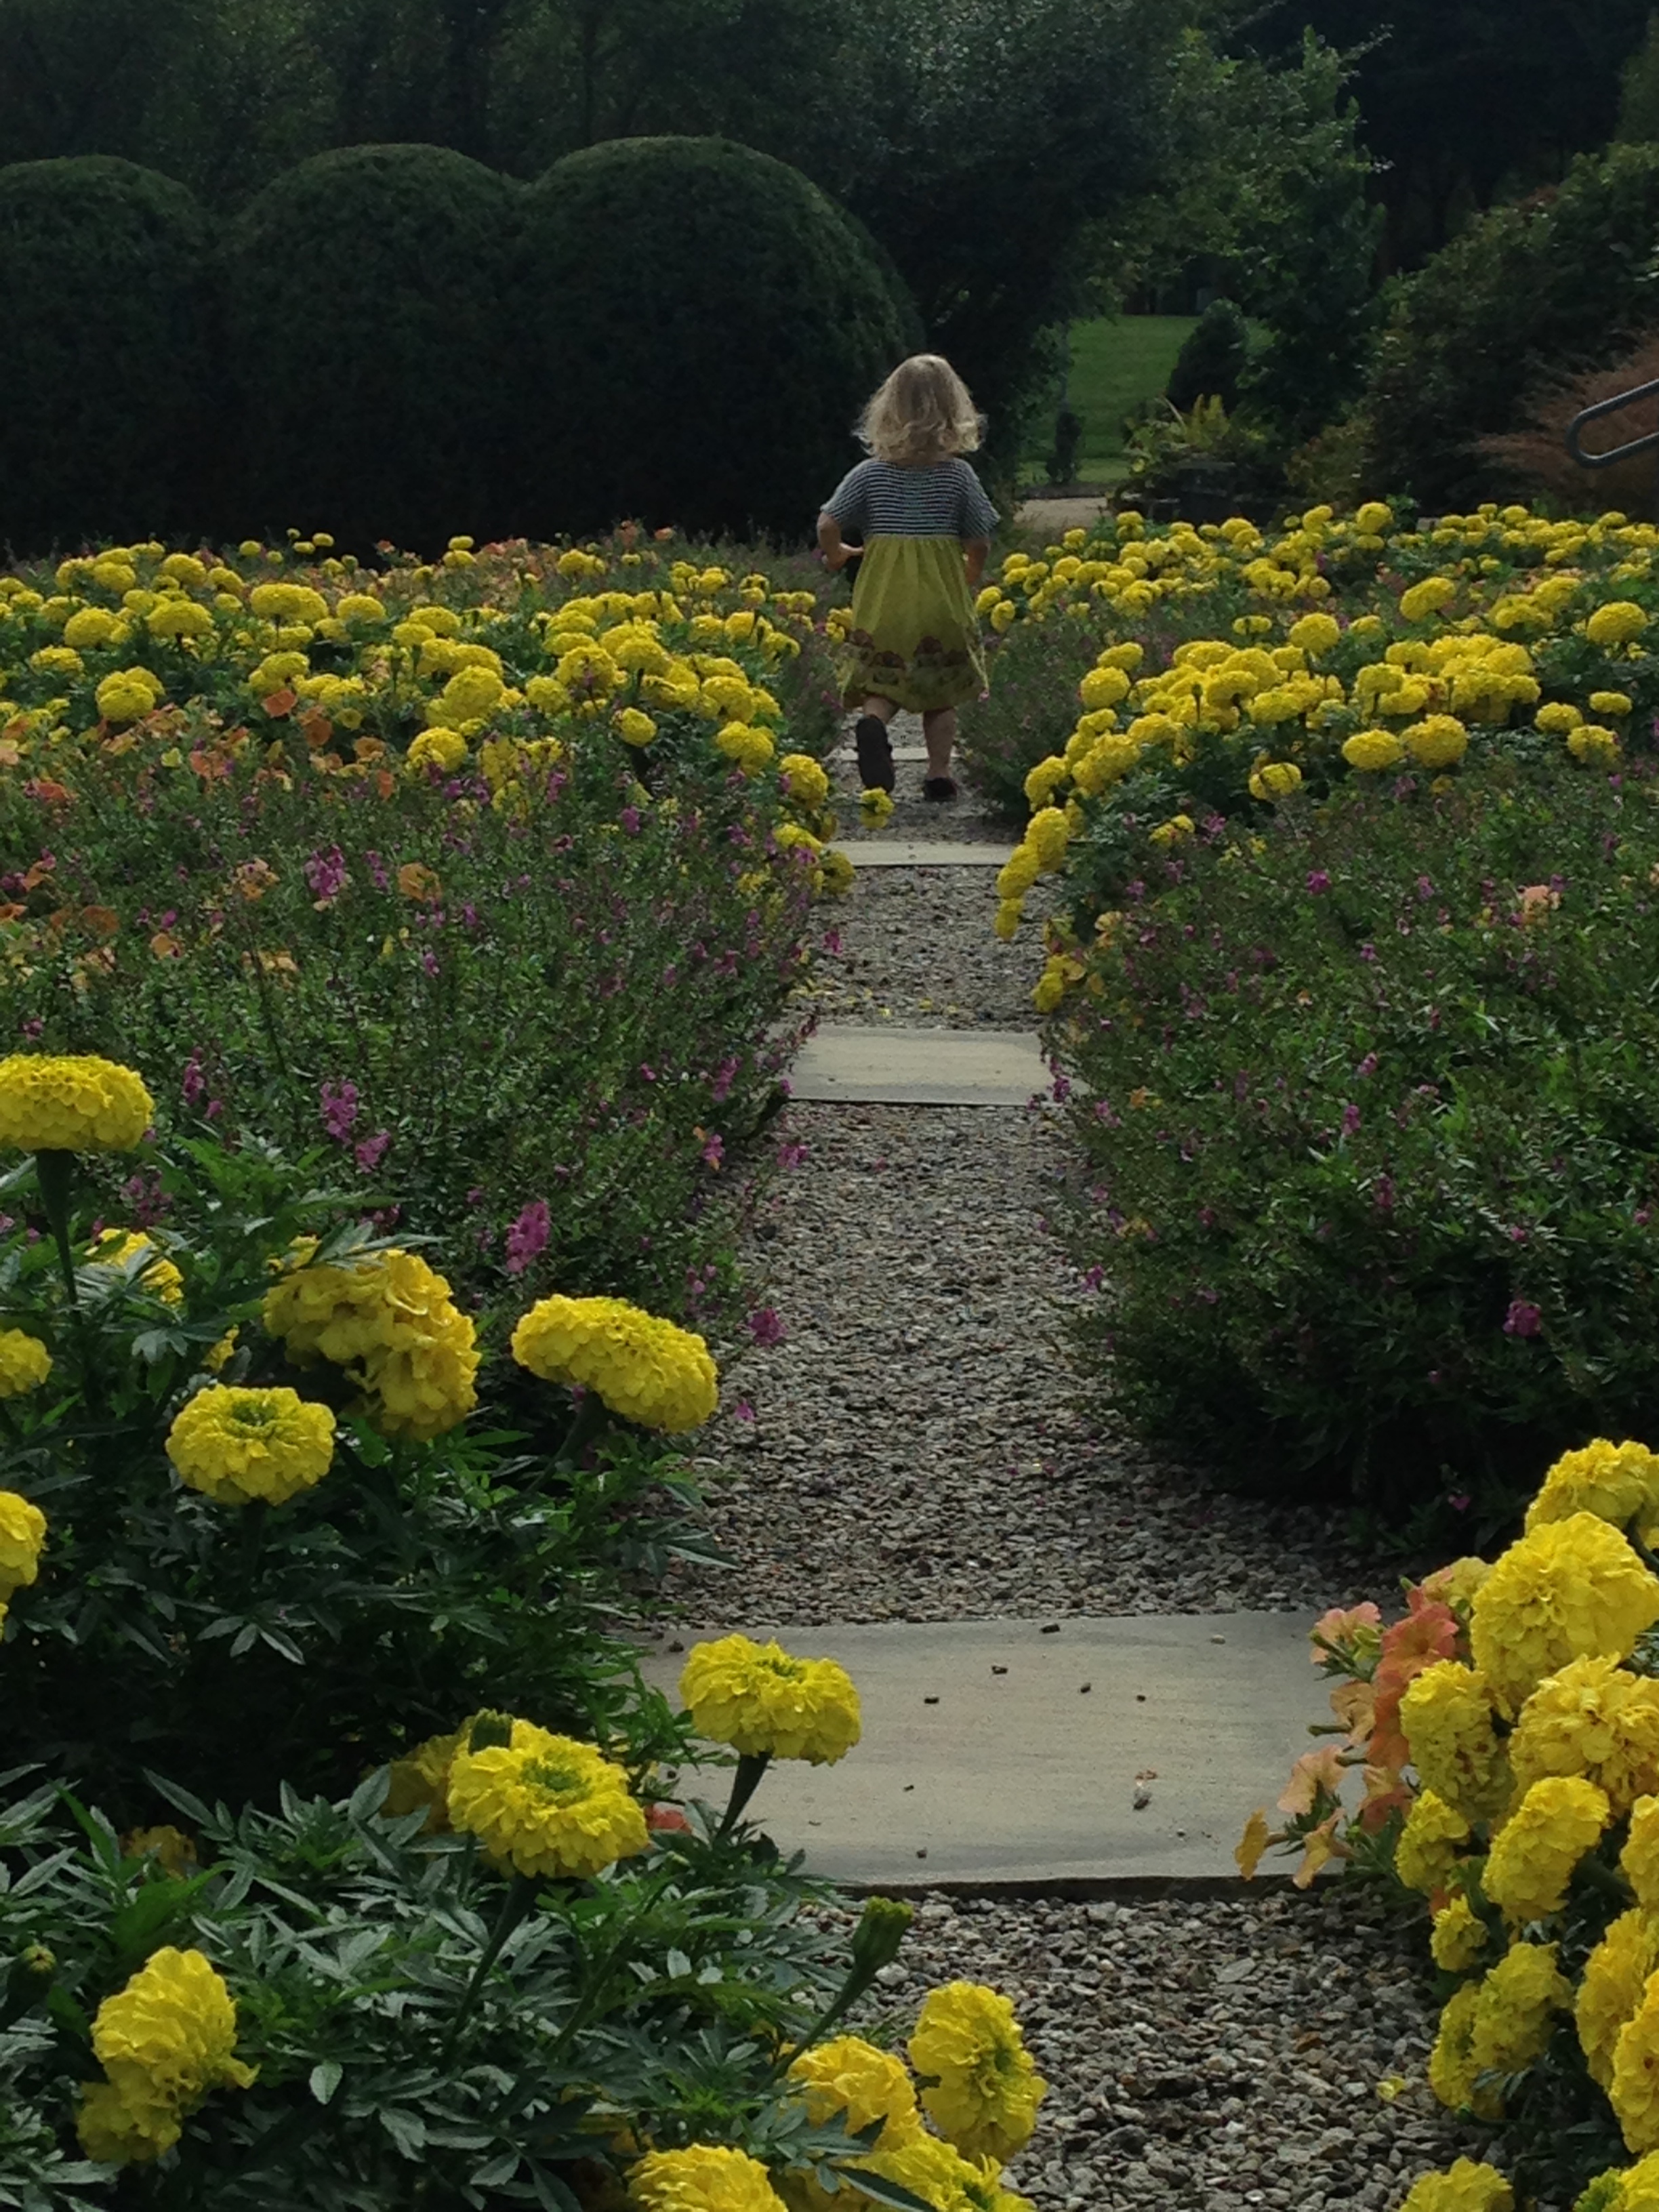 The prettiest little girl I know, my granddaughter, running through the quilt garden at the Arboretum.